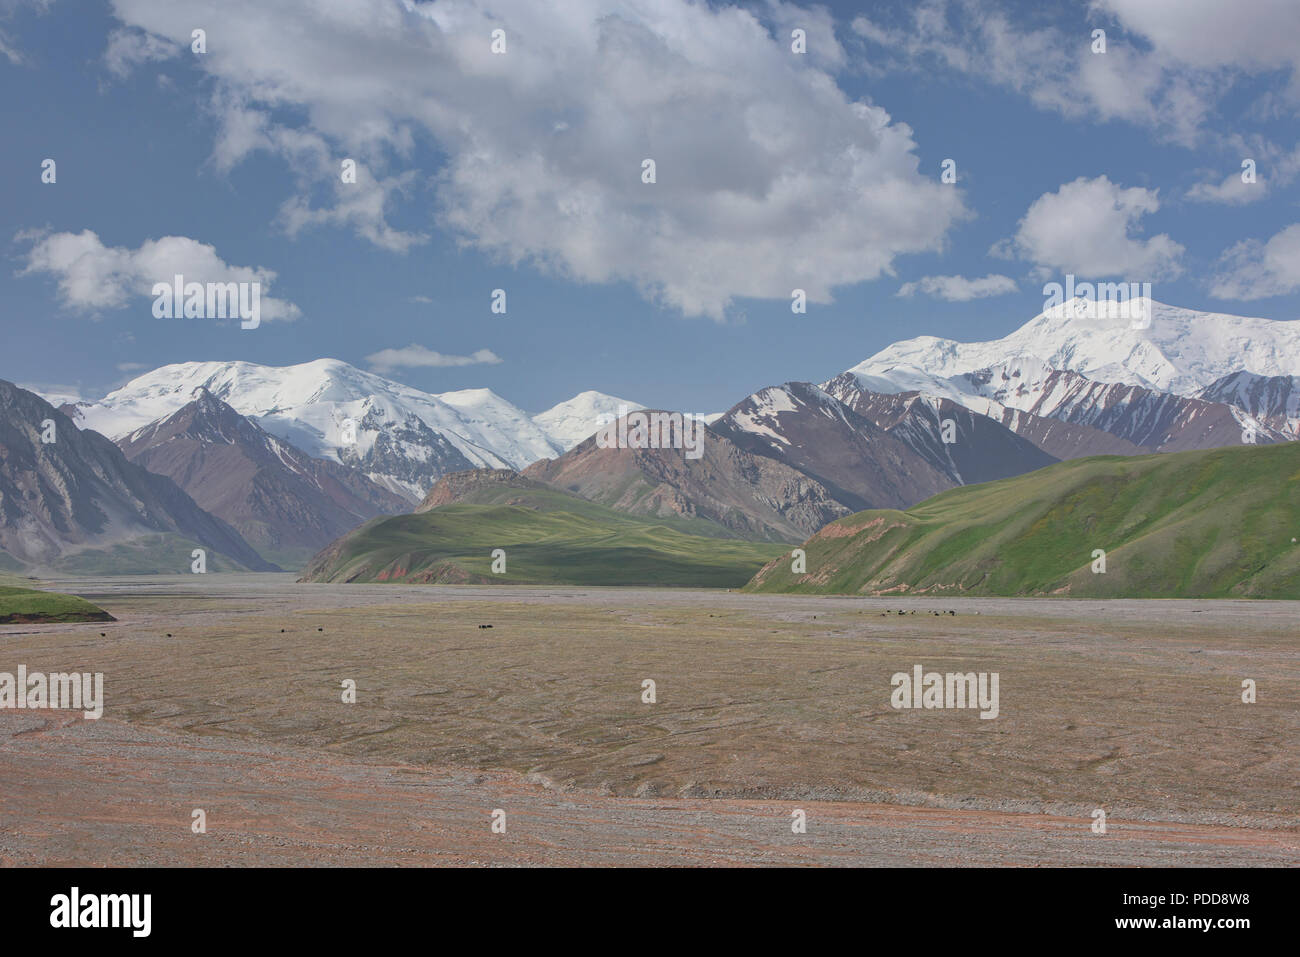 The High Pamirs rise over the start of the Pamir Highway, Kyrgyzstan Stock Photo